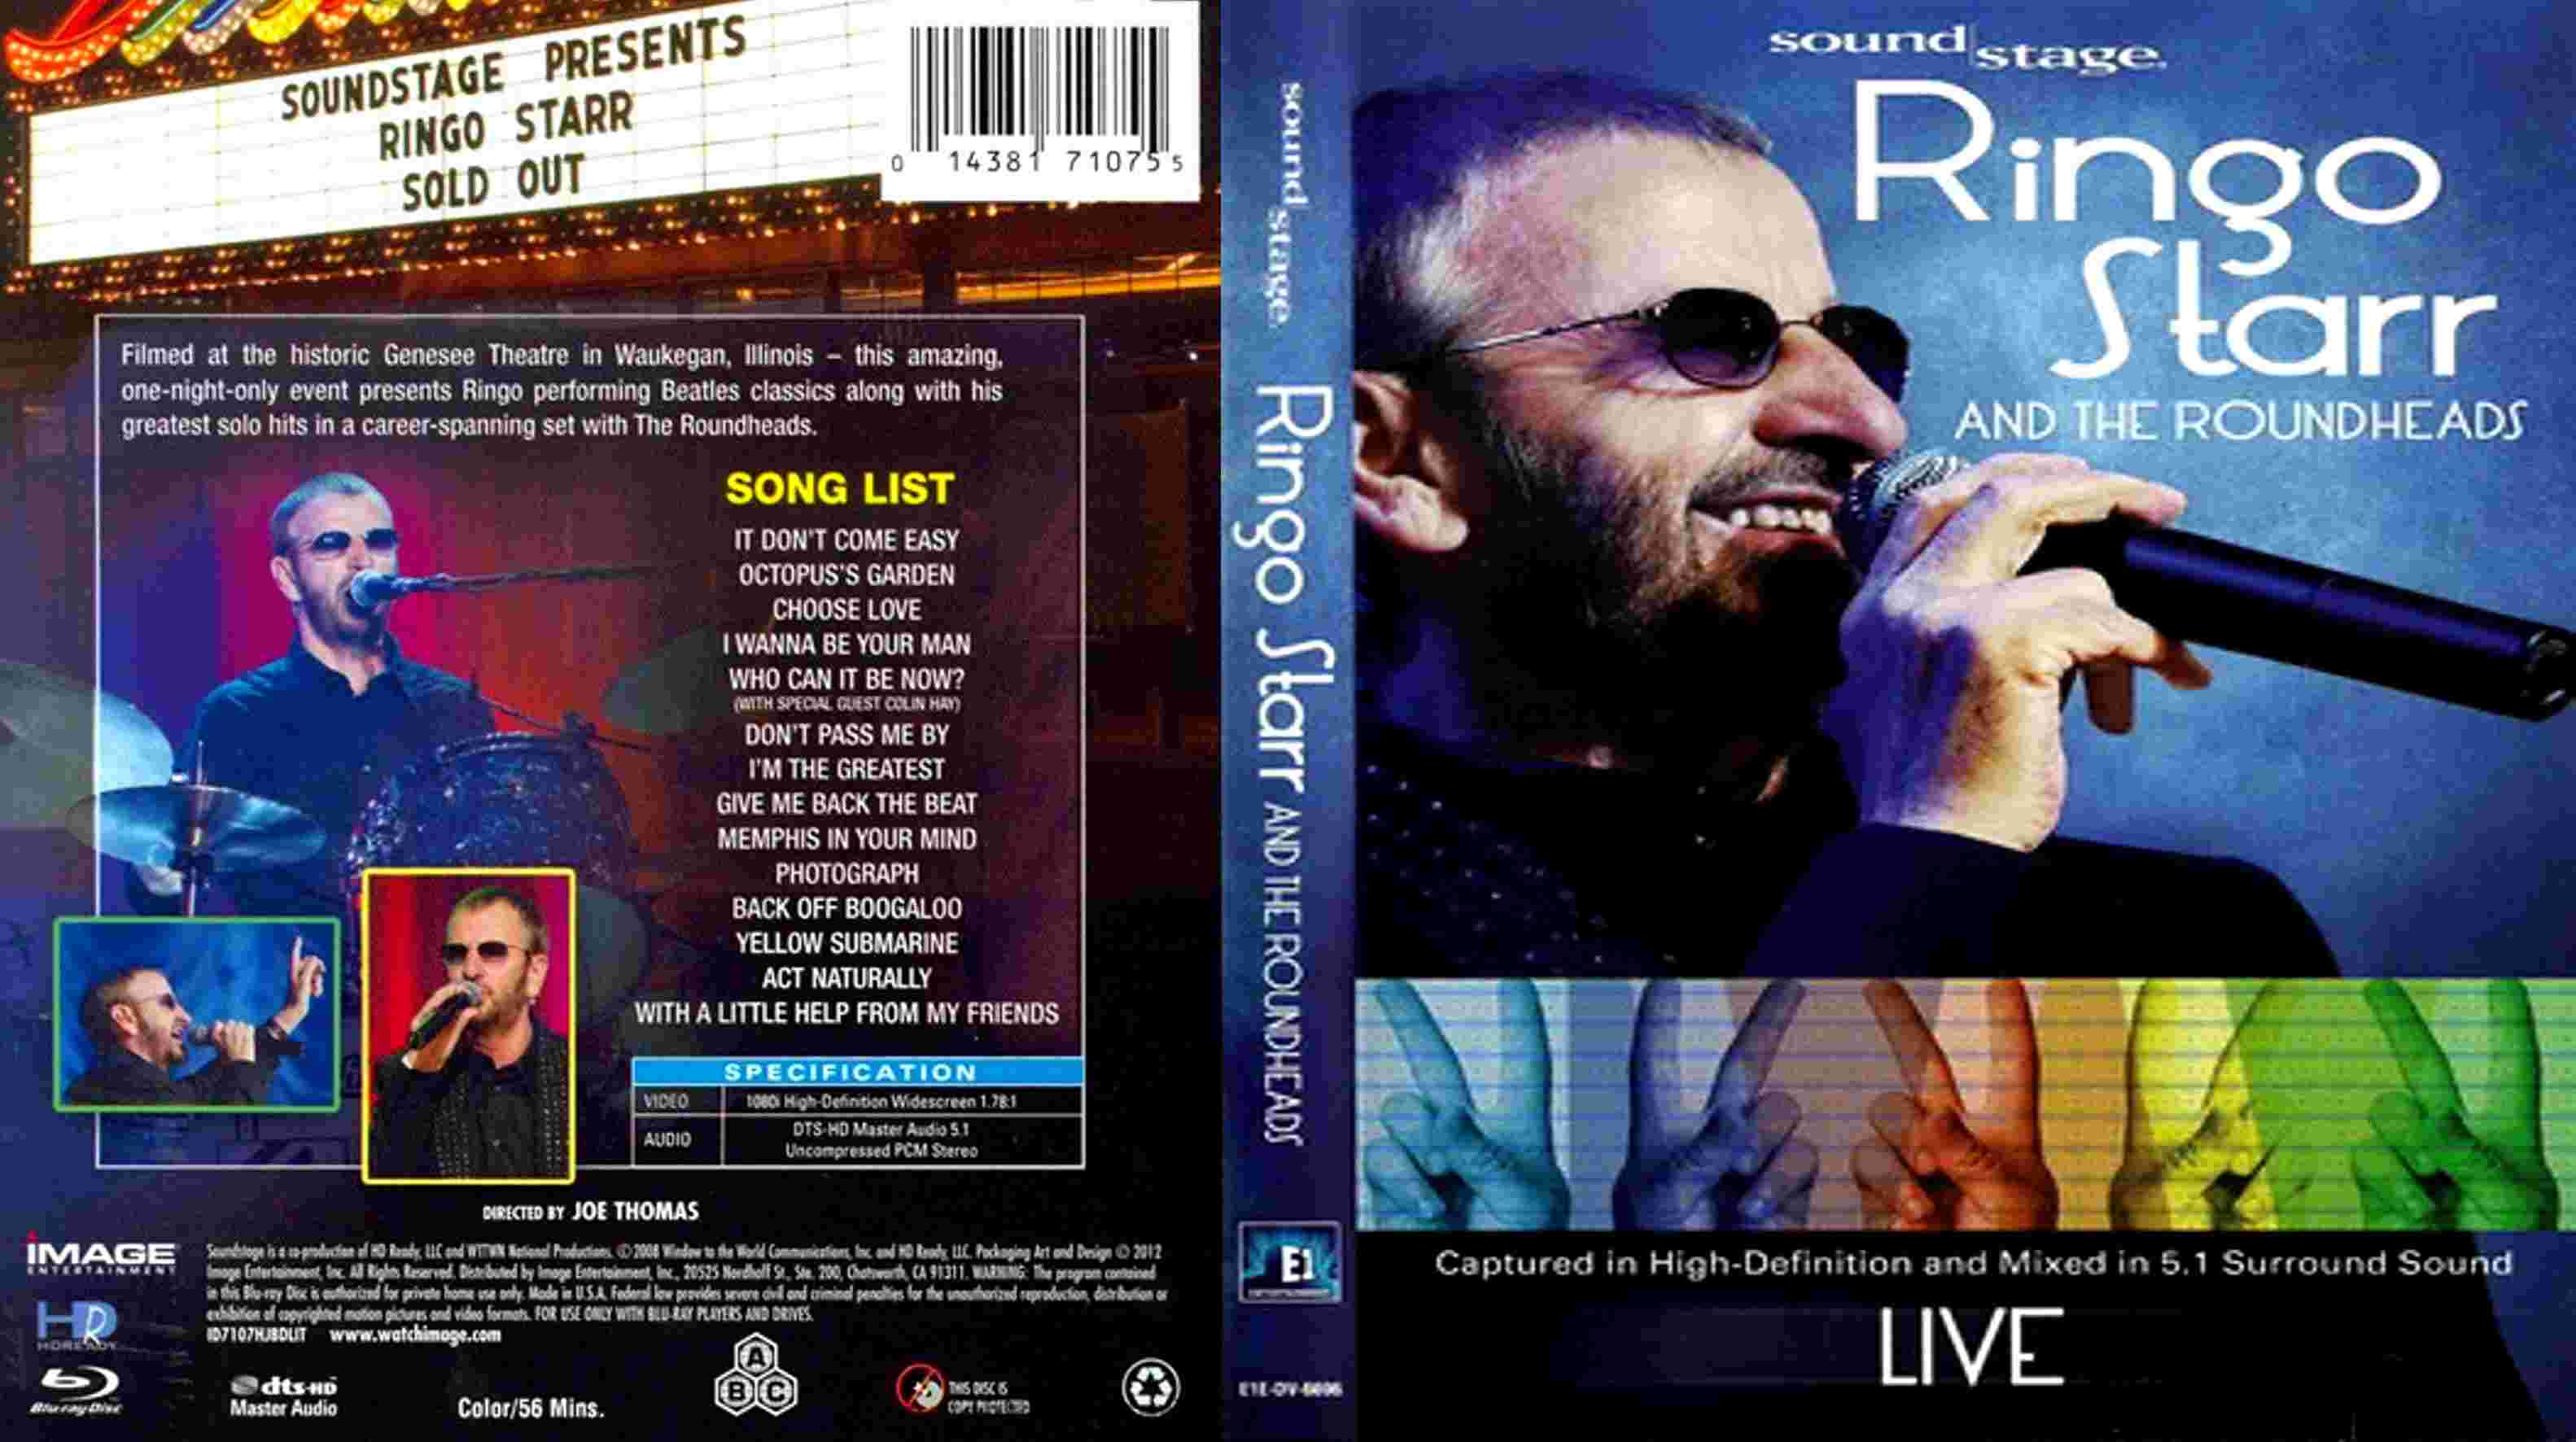 Ringo Starr and the Roundheads Live (2012) [Bluray, 1080i] / AvaxHome